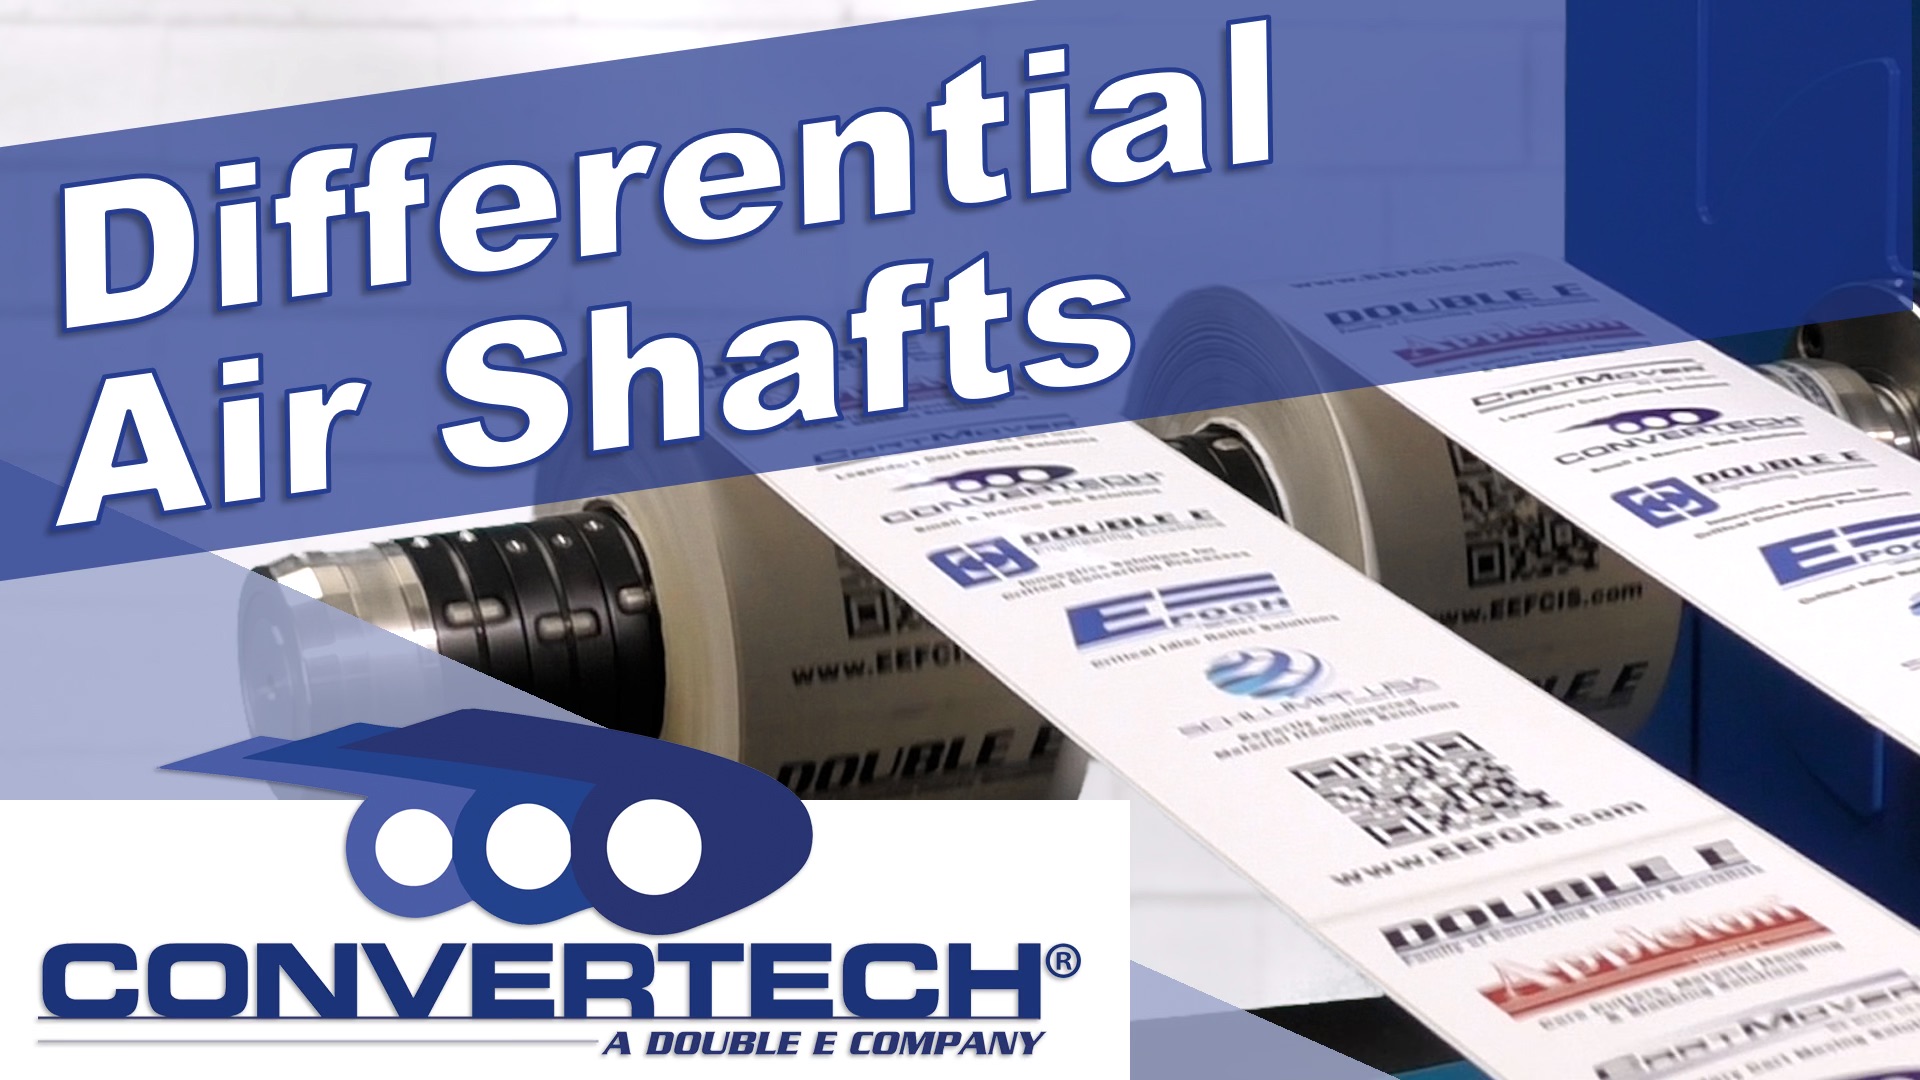 Differential Air Shafts